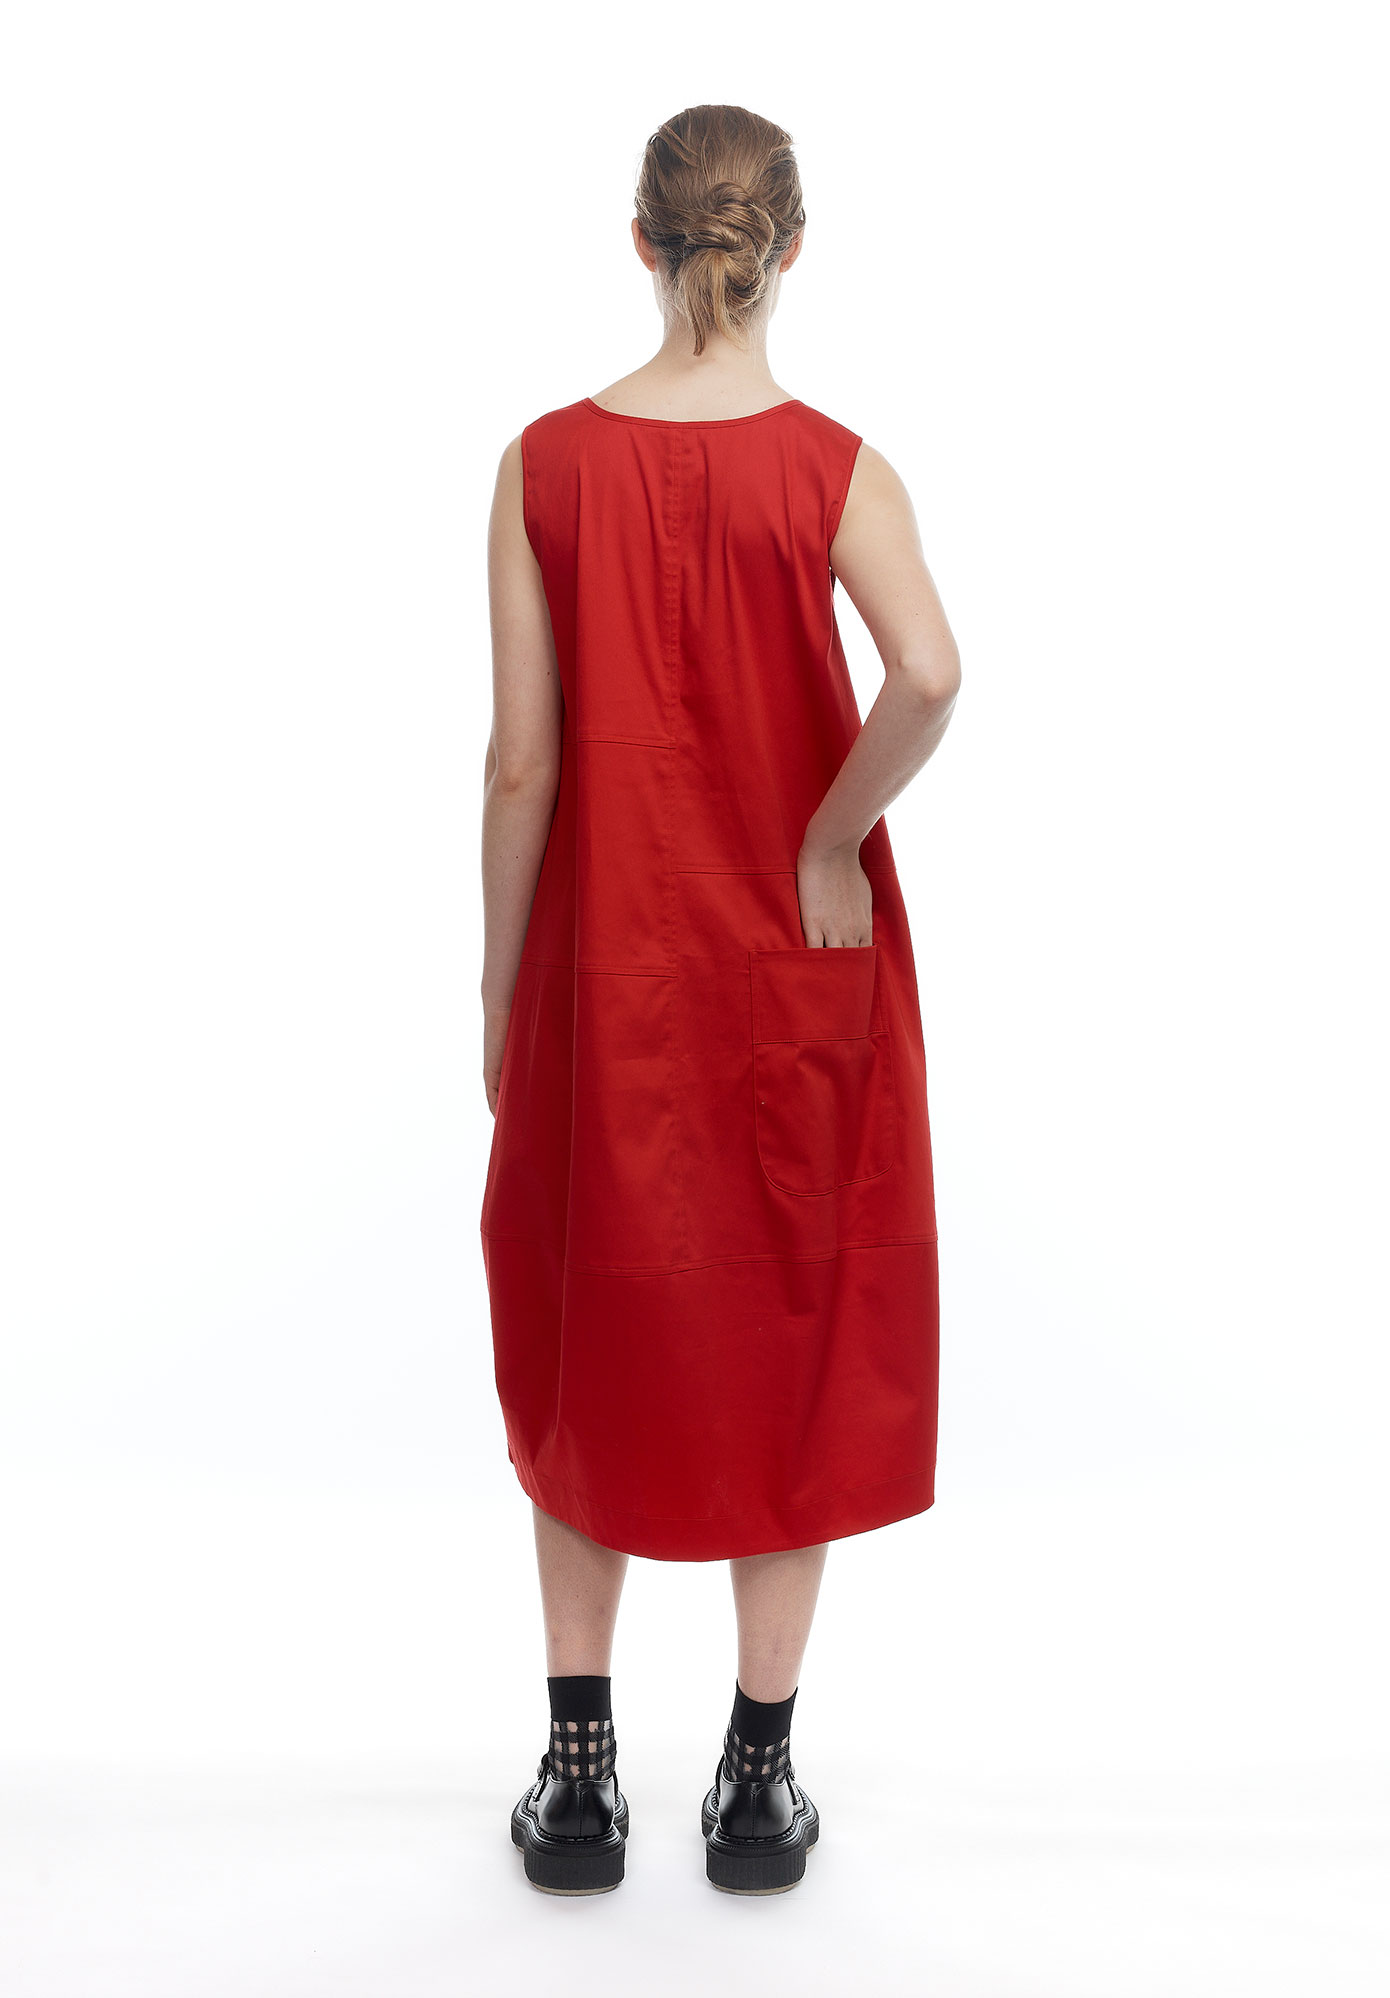 PARALLEL PANEL DRESS - RED